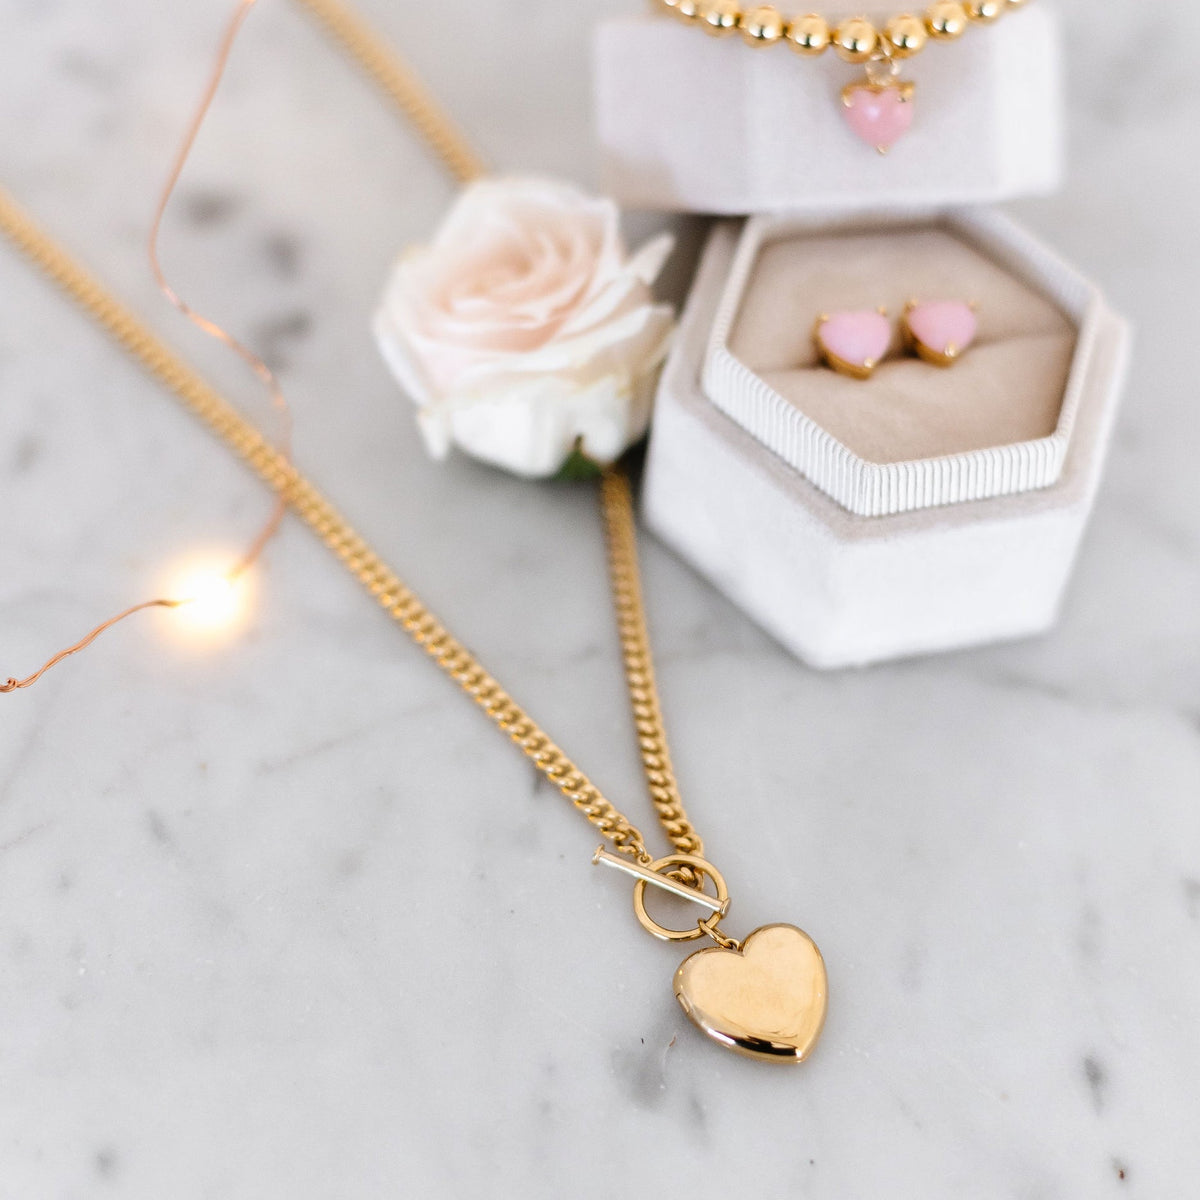 FRAICHE INSPIRE SWEETHEART LOCKET NECKLACE - GOLD - SO PRETTY CARA COTTER